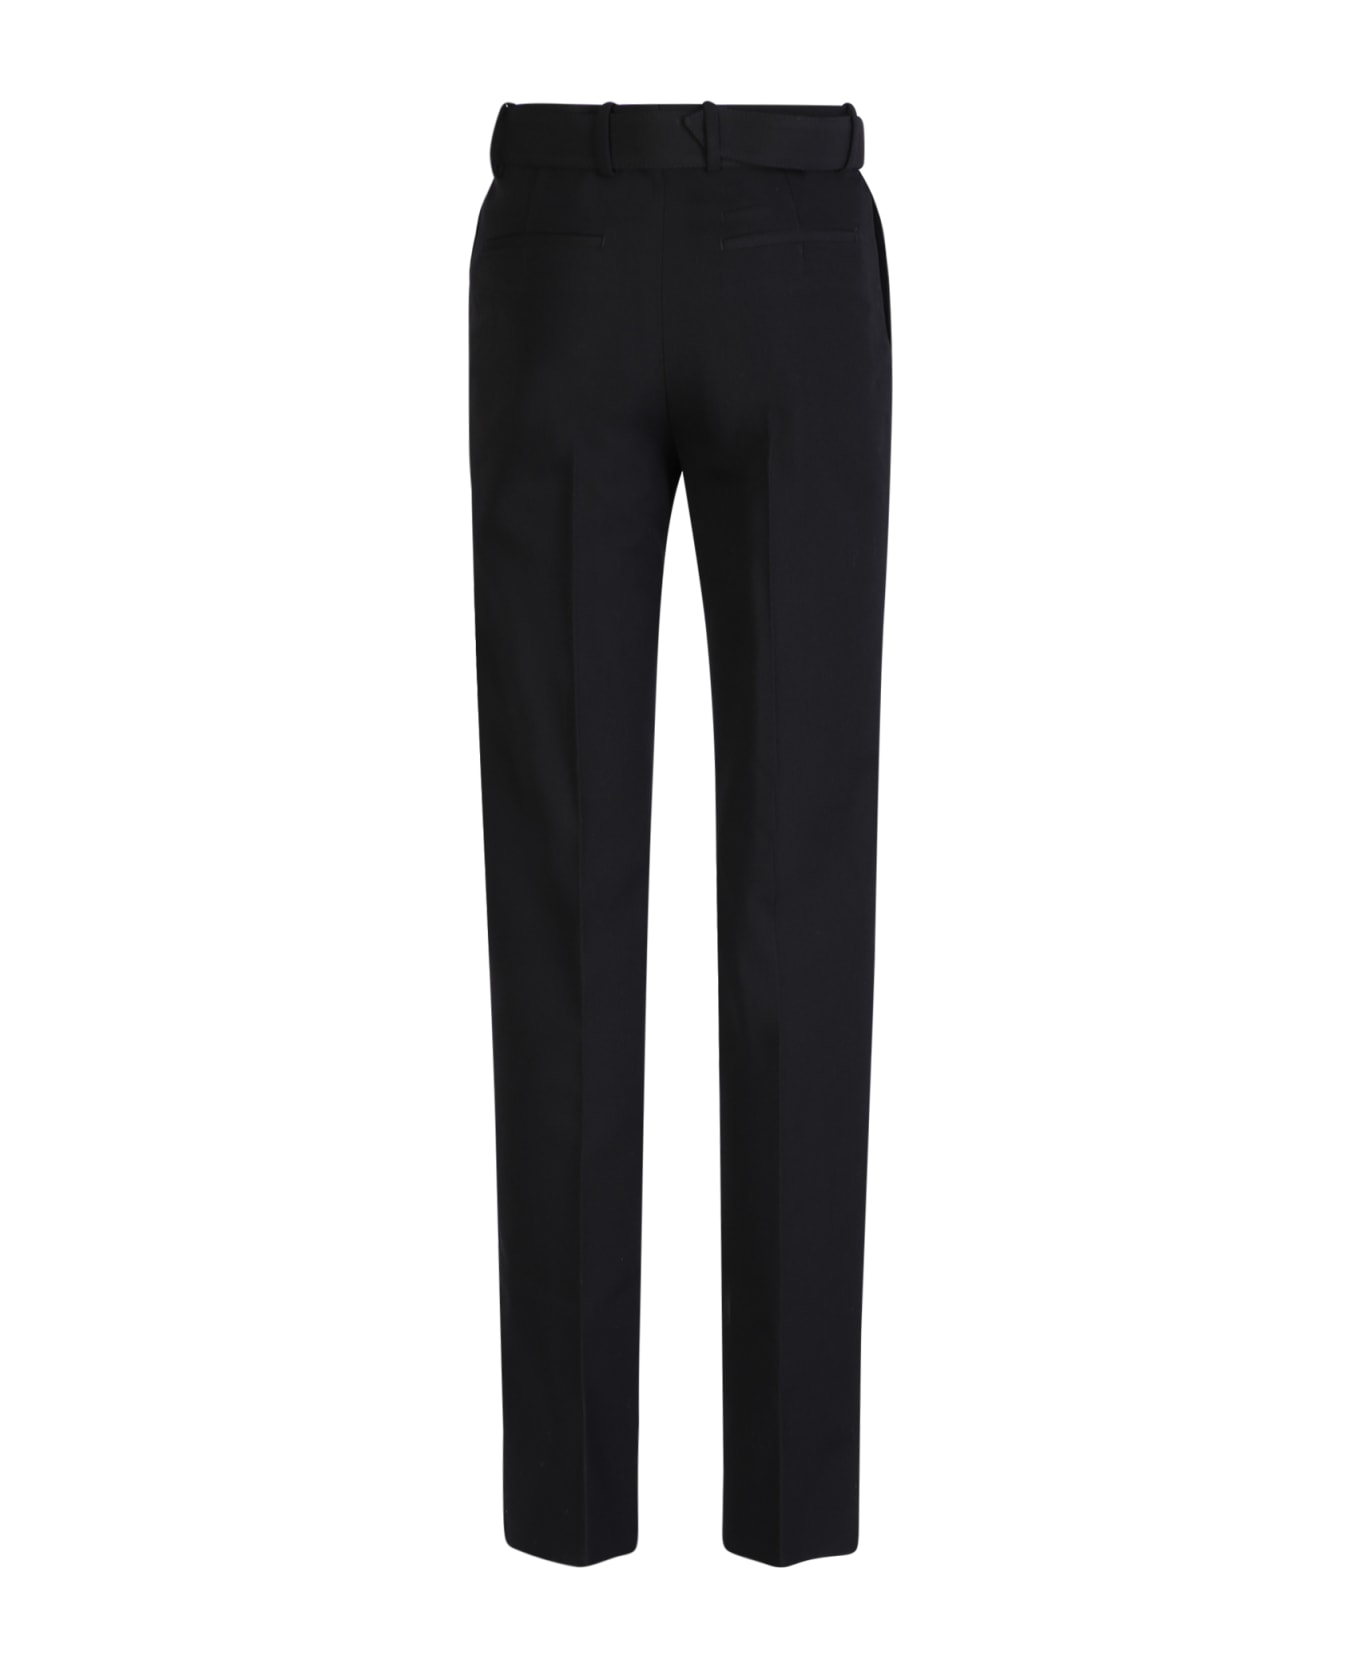 Off-White Tailored Trousers - Black